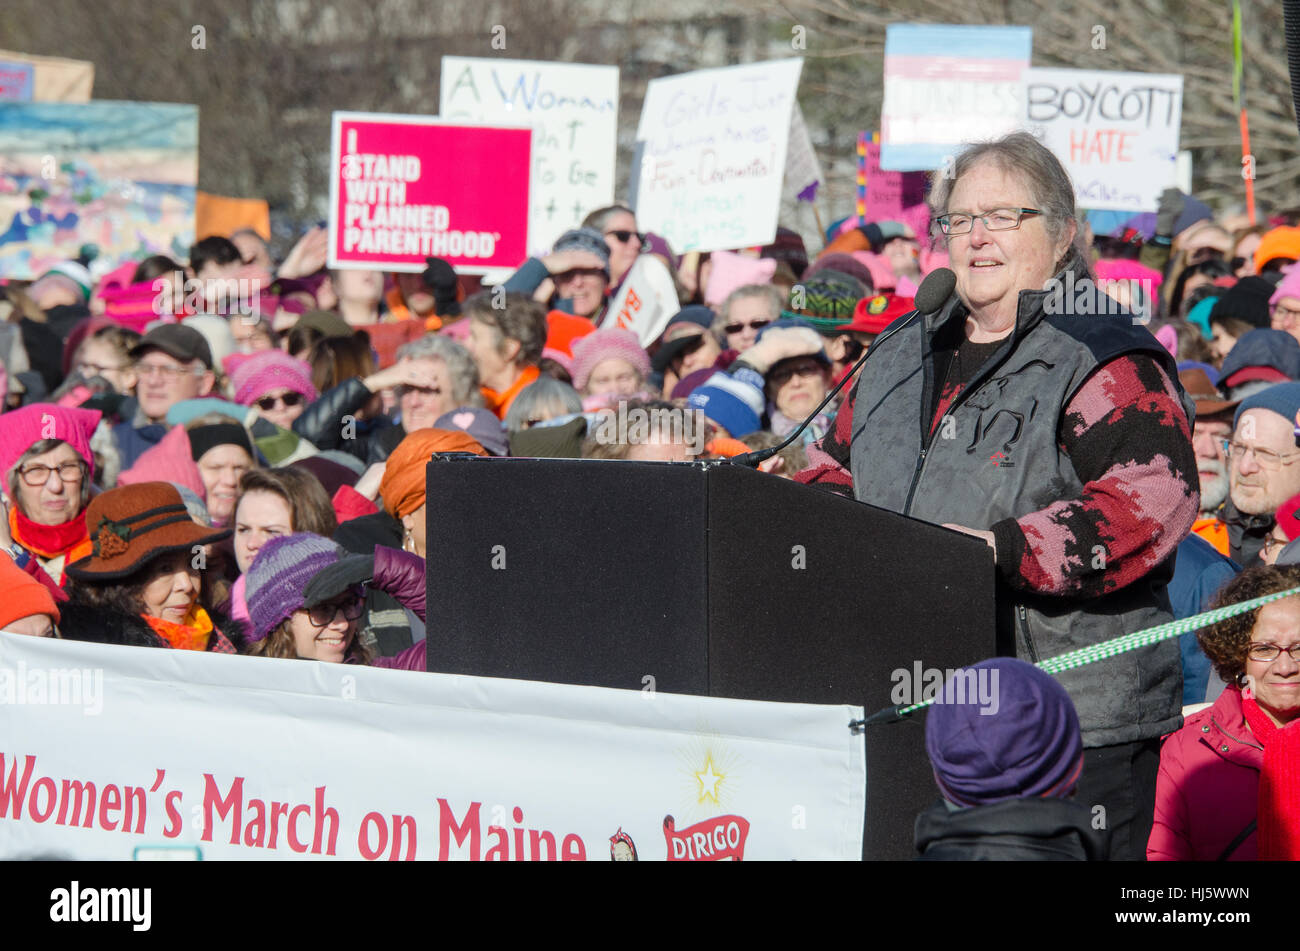 Augusta, Maine, USA. 21st Jan, 2017.  Lois Galgay-Reckitt of the Maine State House of Representatives addresses the Women’s March on Maine rally in front of the Maine State Capitol. The March on Maine is a sister rally to the Women’s March on Washington. Credit: Jennifer Booher/Alamy Live News Stock Photo